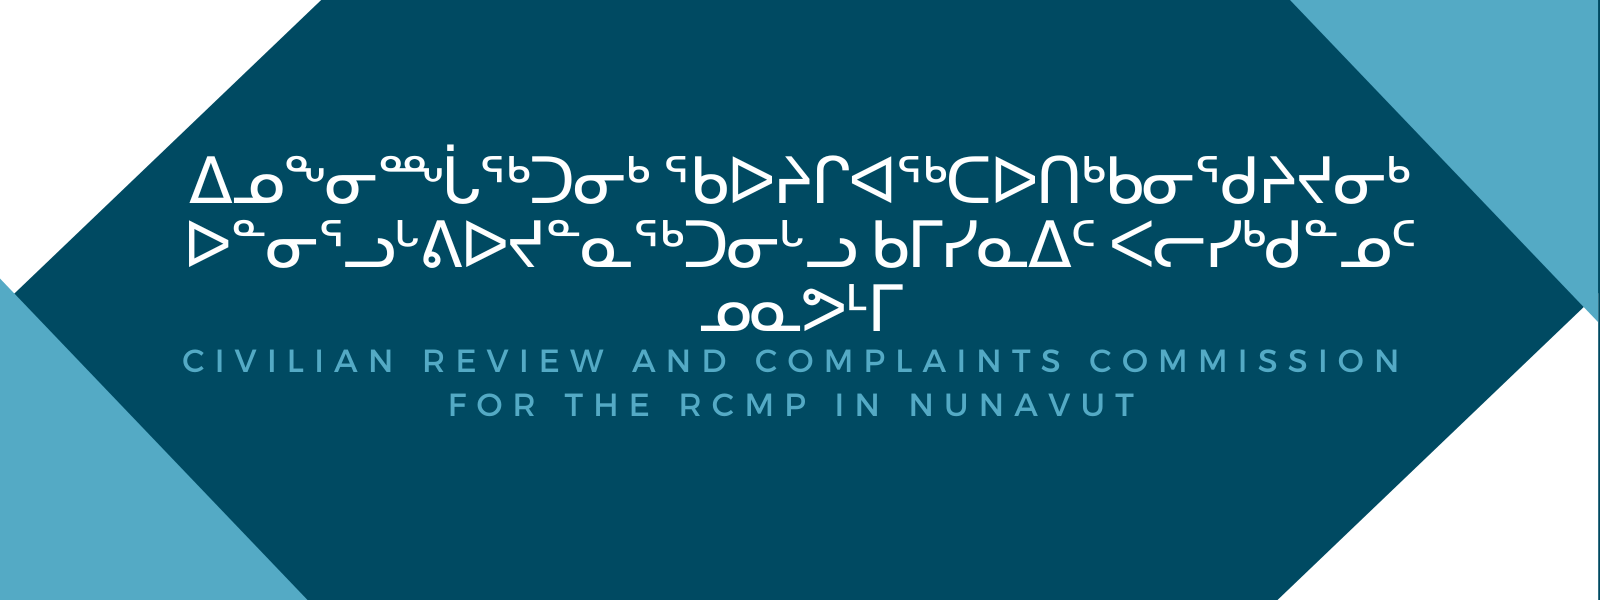 Civilian Review and Complaints Commission for the RCMP in Nunavut 